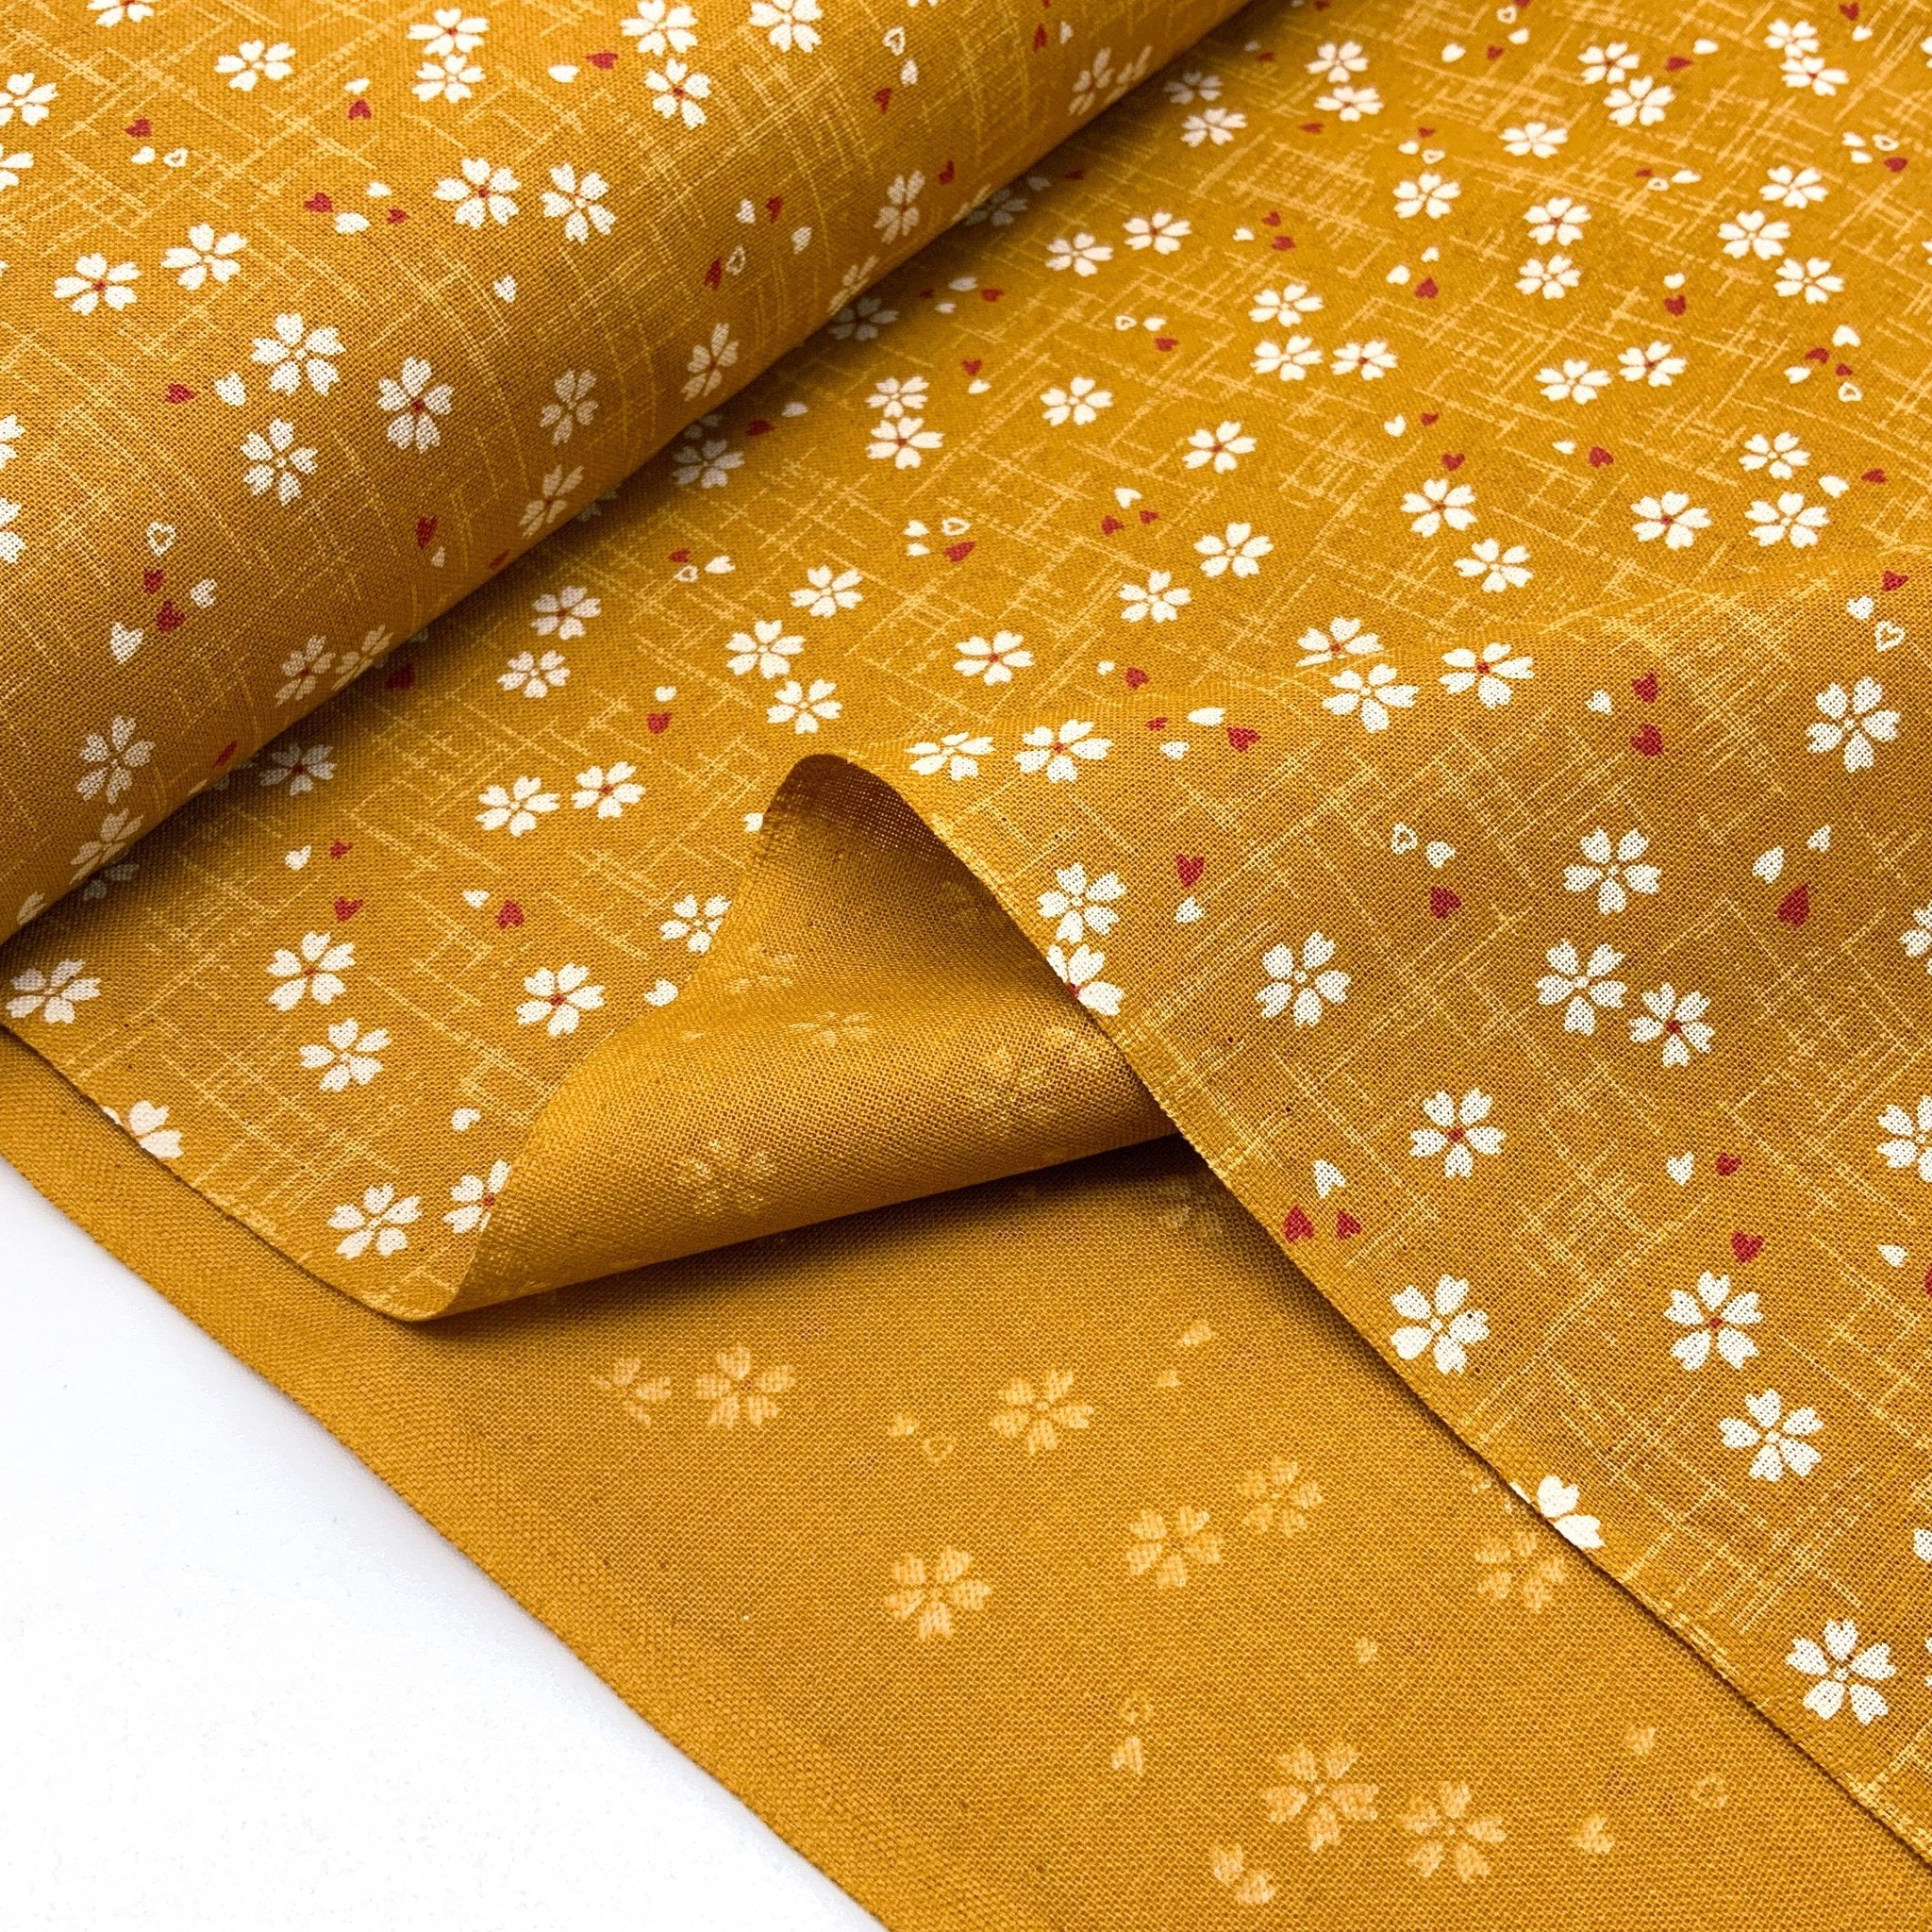 Japanese Cotton Sheeting Print - Cherry Blossom with Falling Petals Mustard